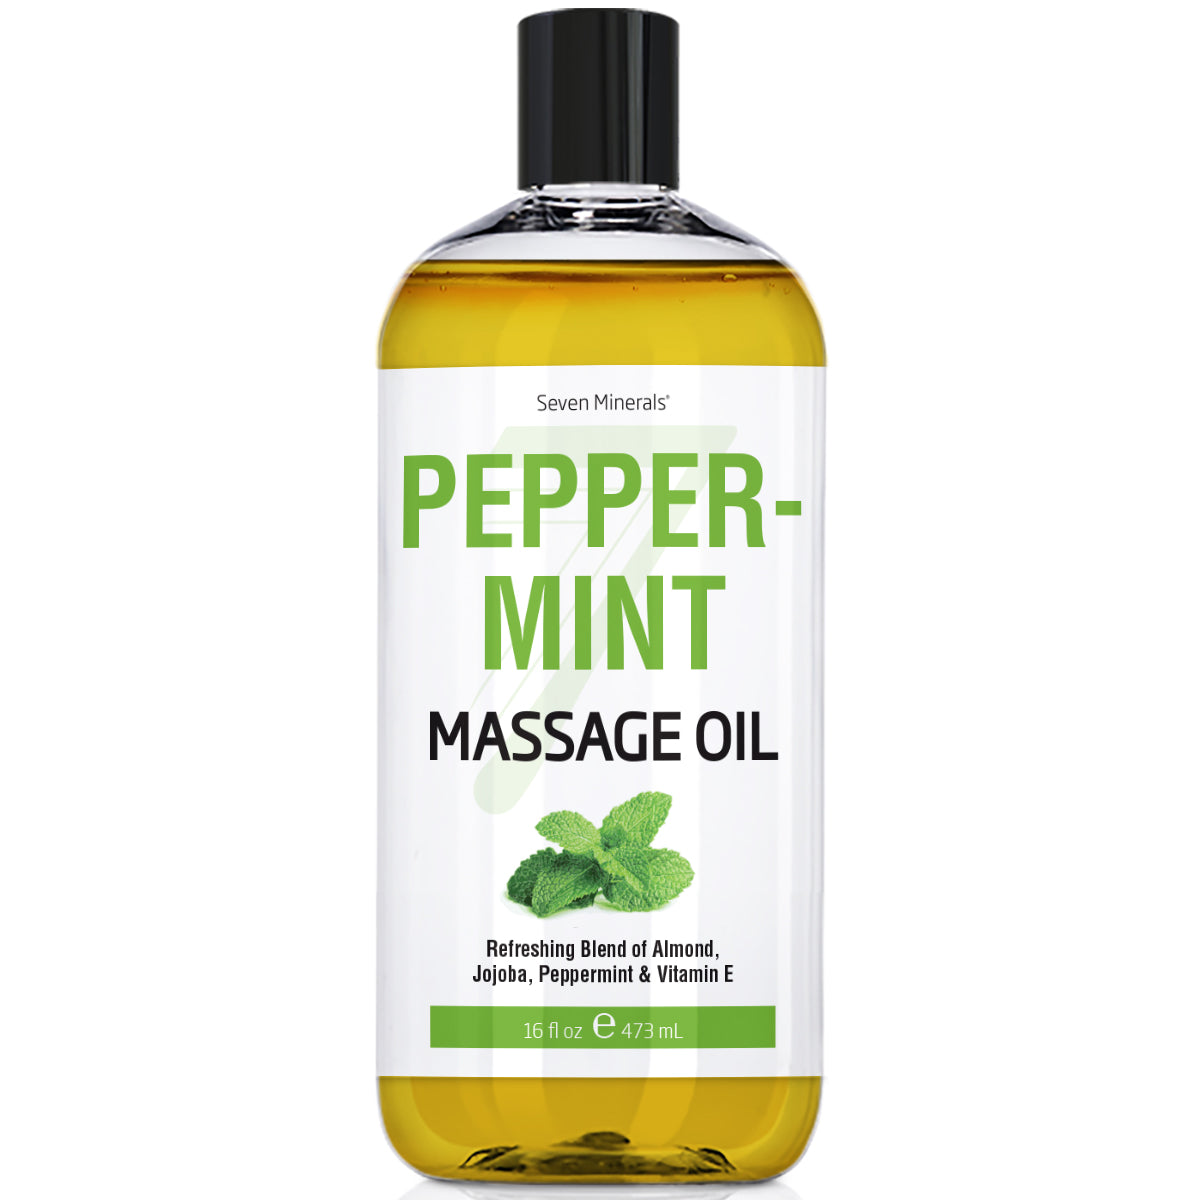 New Peppermint Massage Oil for Massage Therapy - Big 16oz Bottle - Ideal for Professional or at-Home Body Massage. Soothing Natural Blend of Almond, Jojoba, Peppermint, & Vitamin E